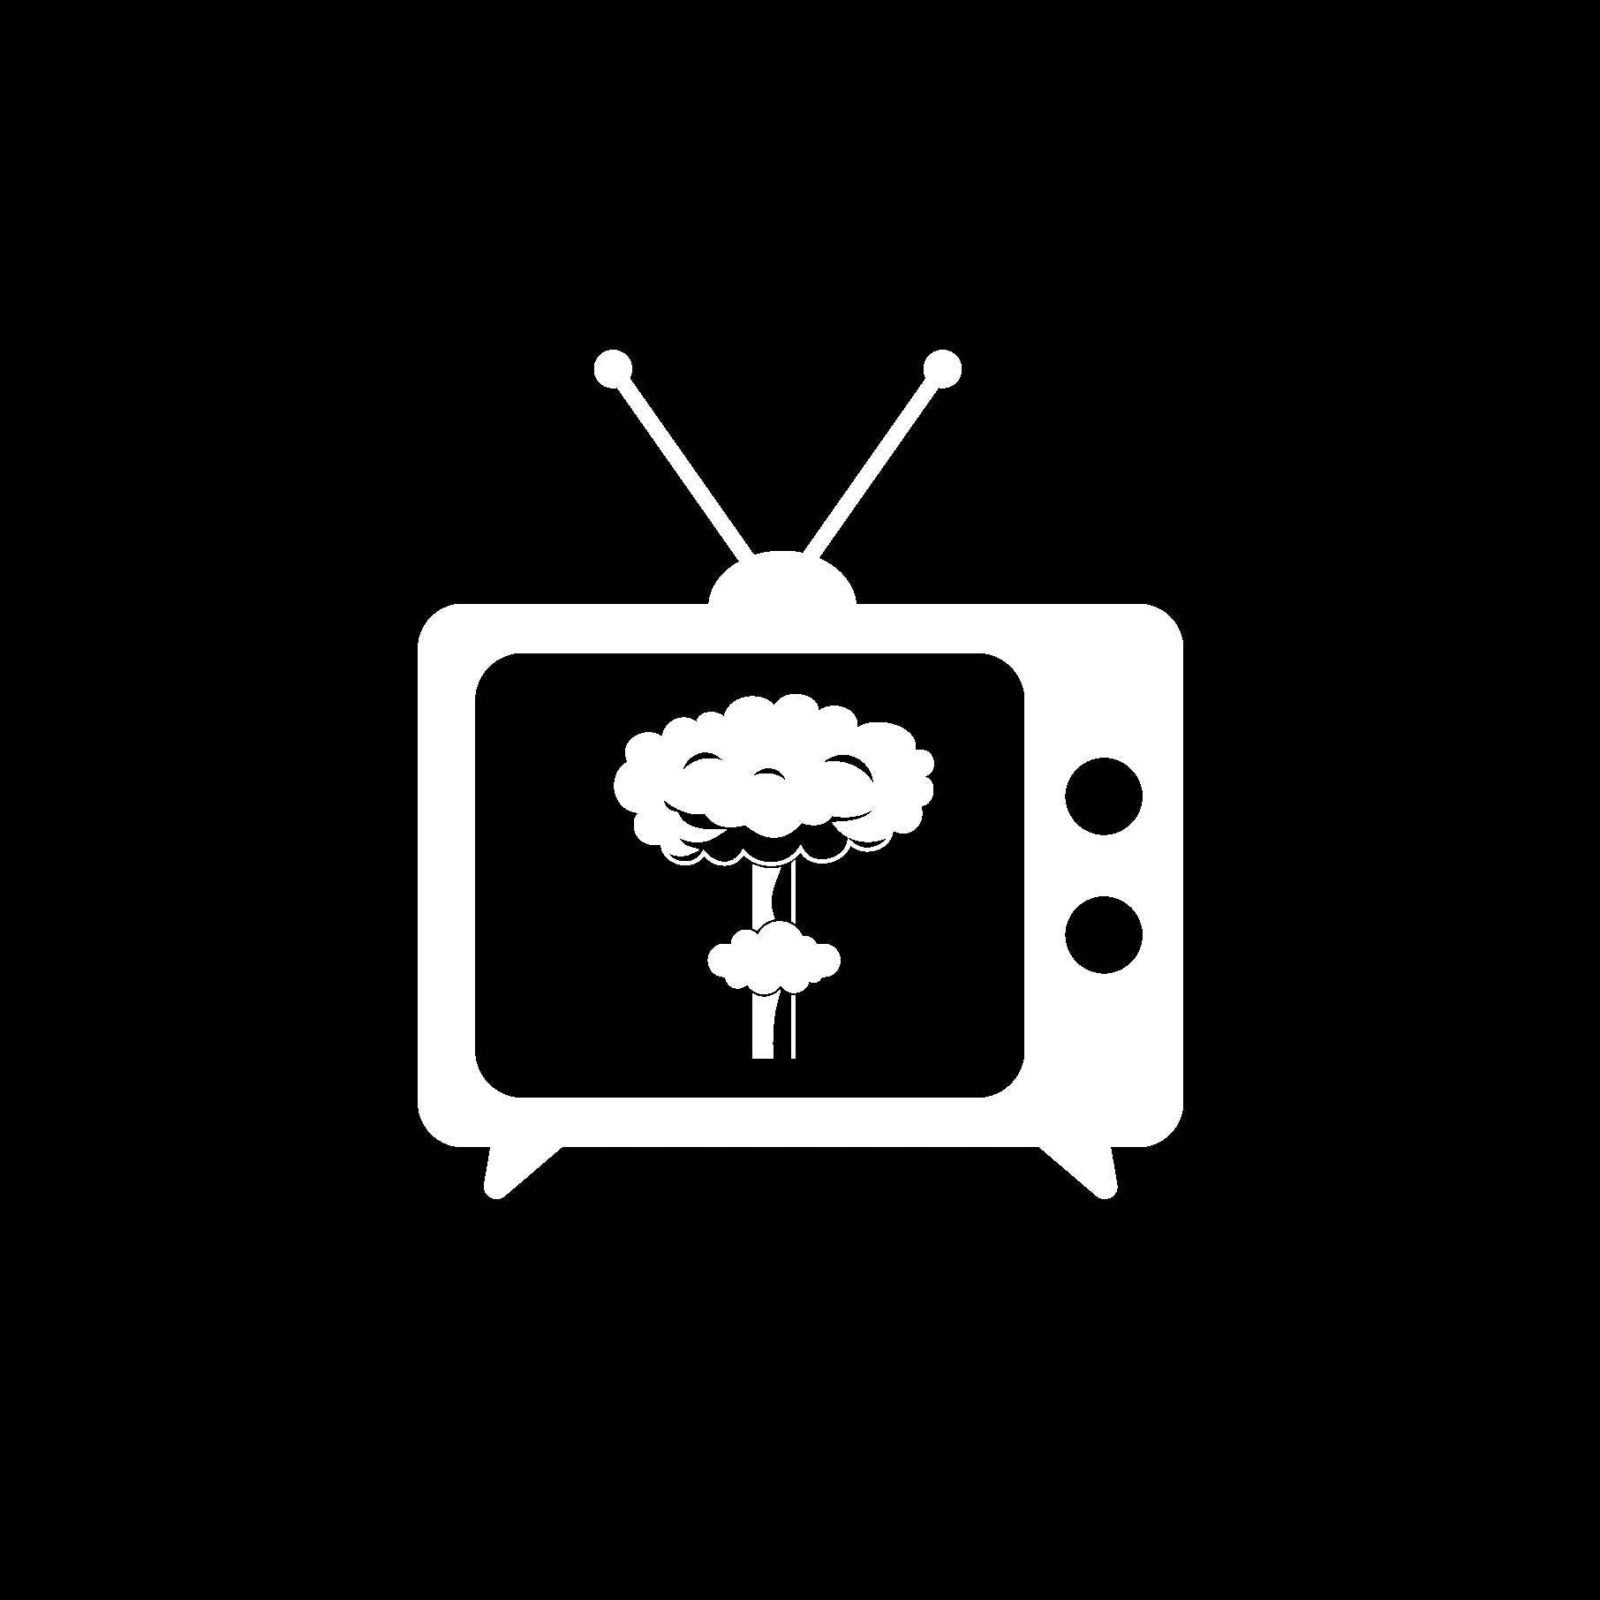 Image of black and white graphic from the Mind Blown publication showing a TV with a nuclear cloud